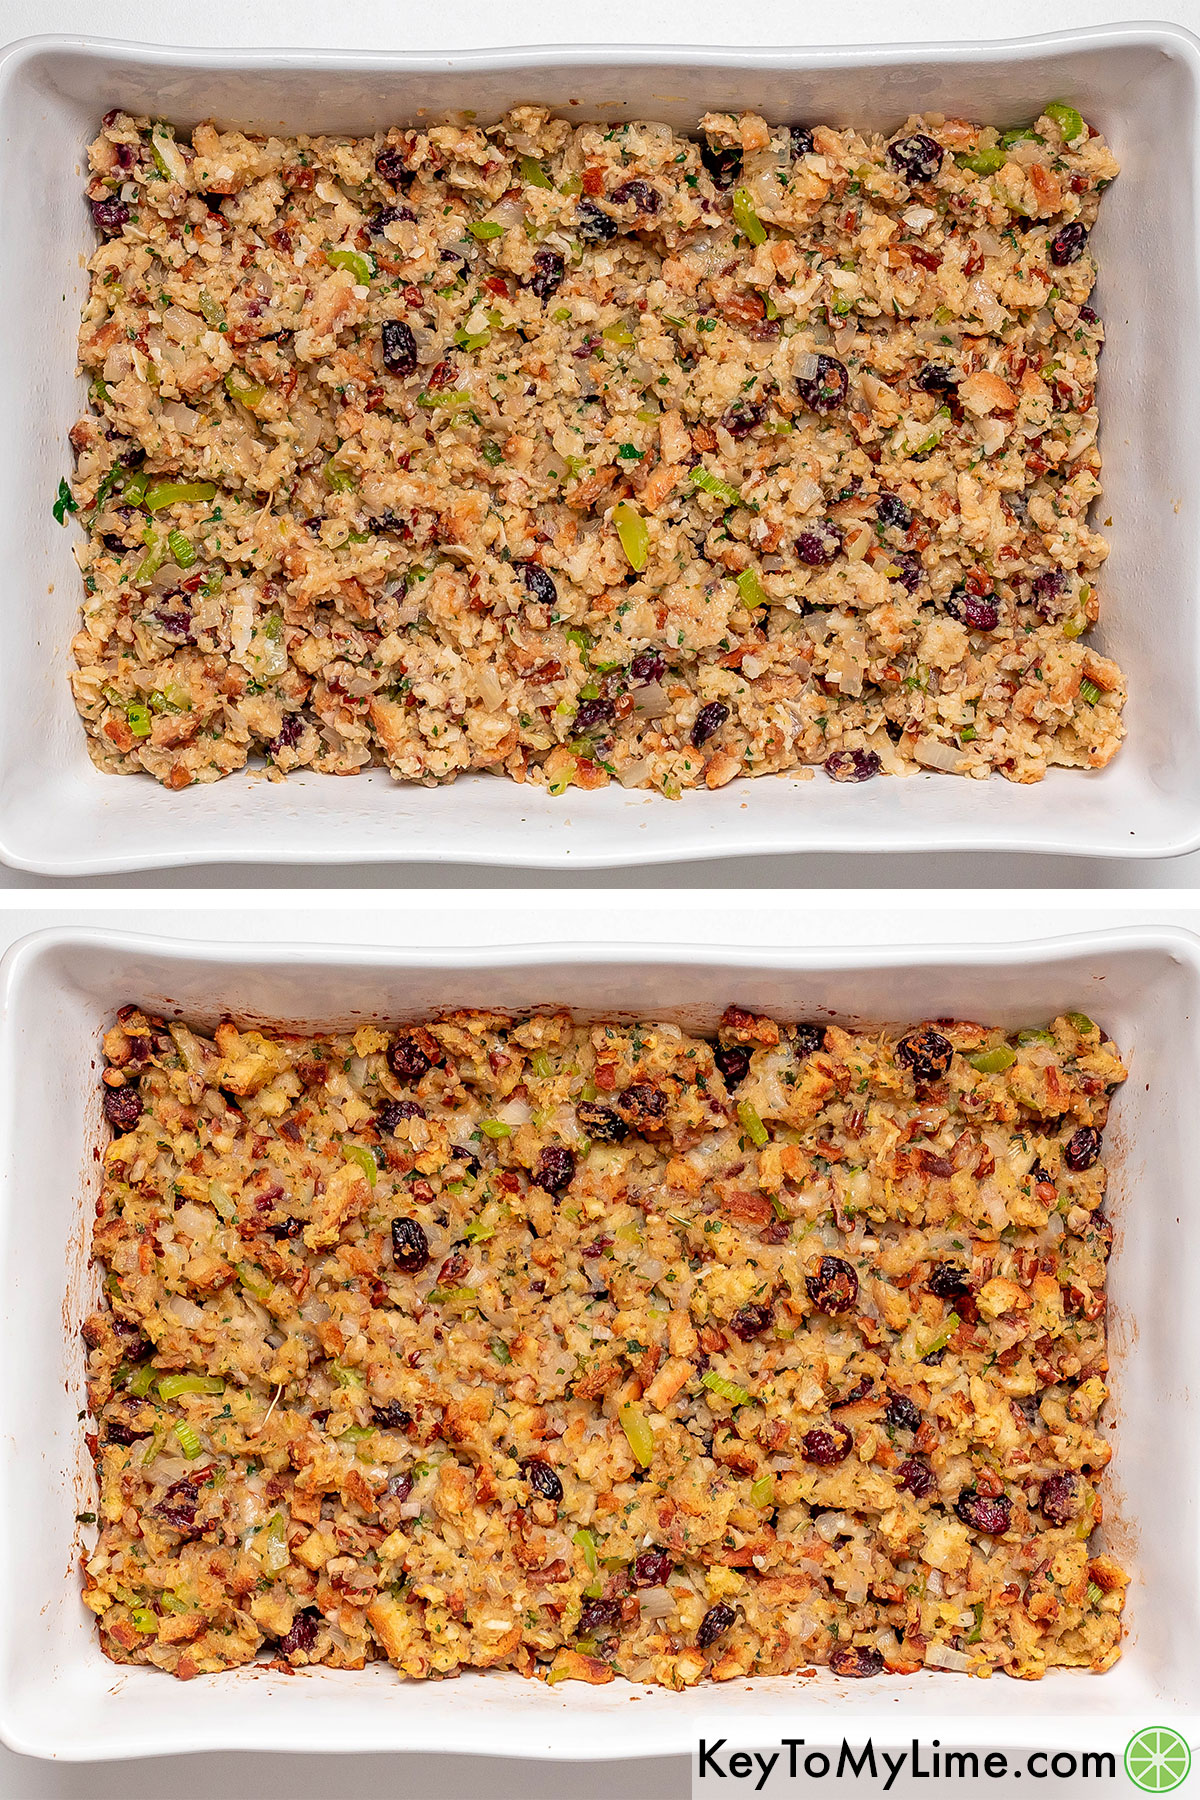 Before and after baking the stuffing in a casserole dish in the oven.